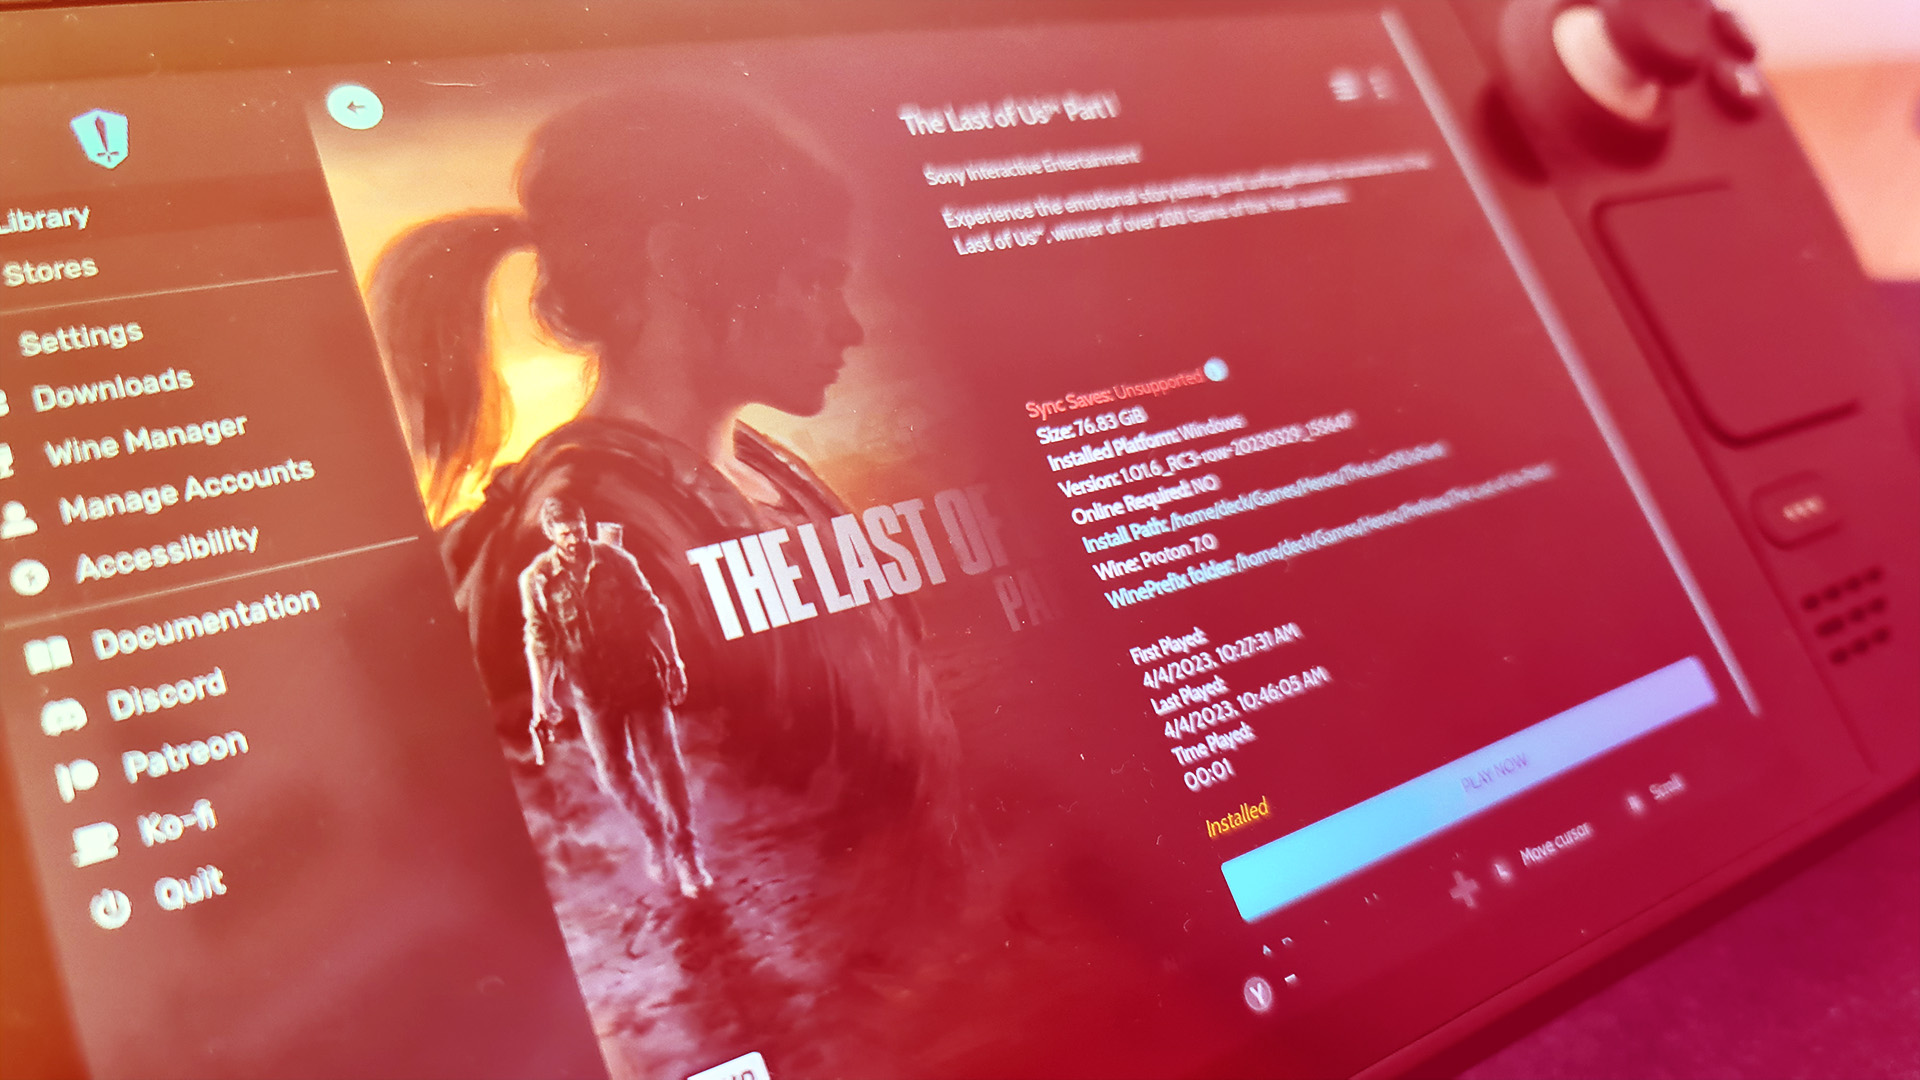 The Last of Us Part 1 finally gets Steam Deck verified